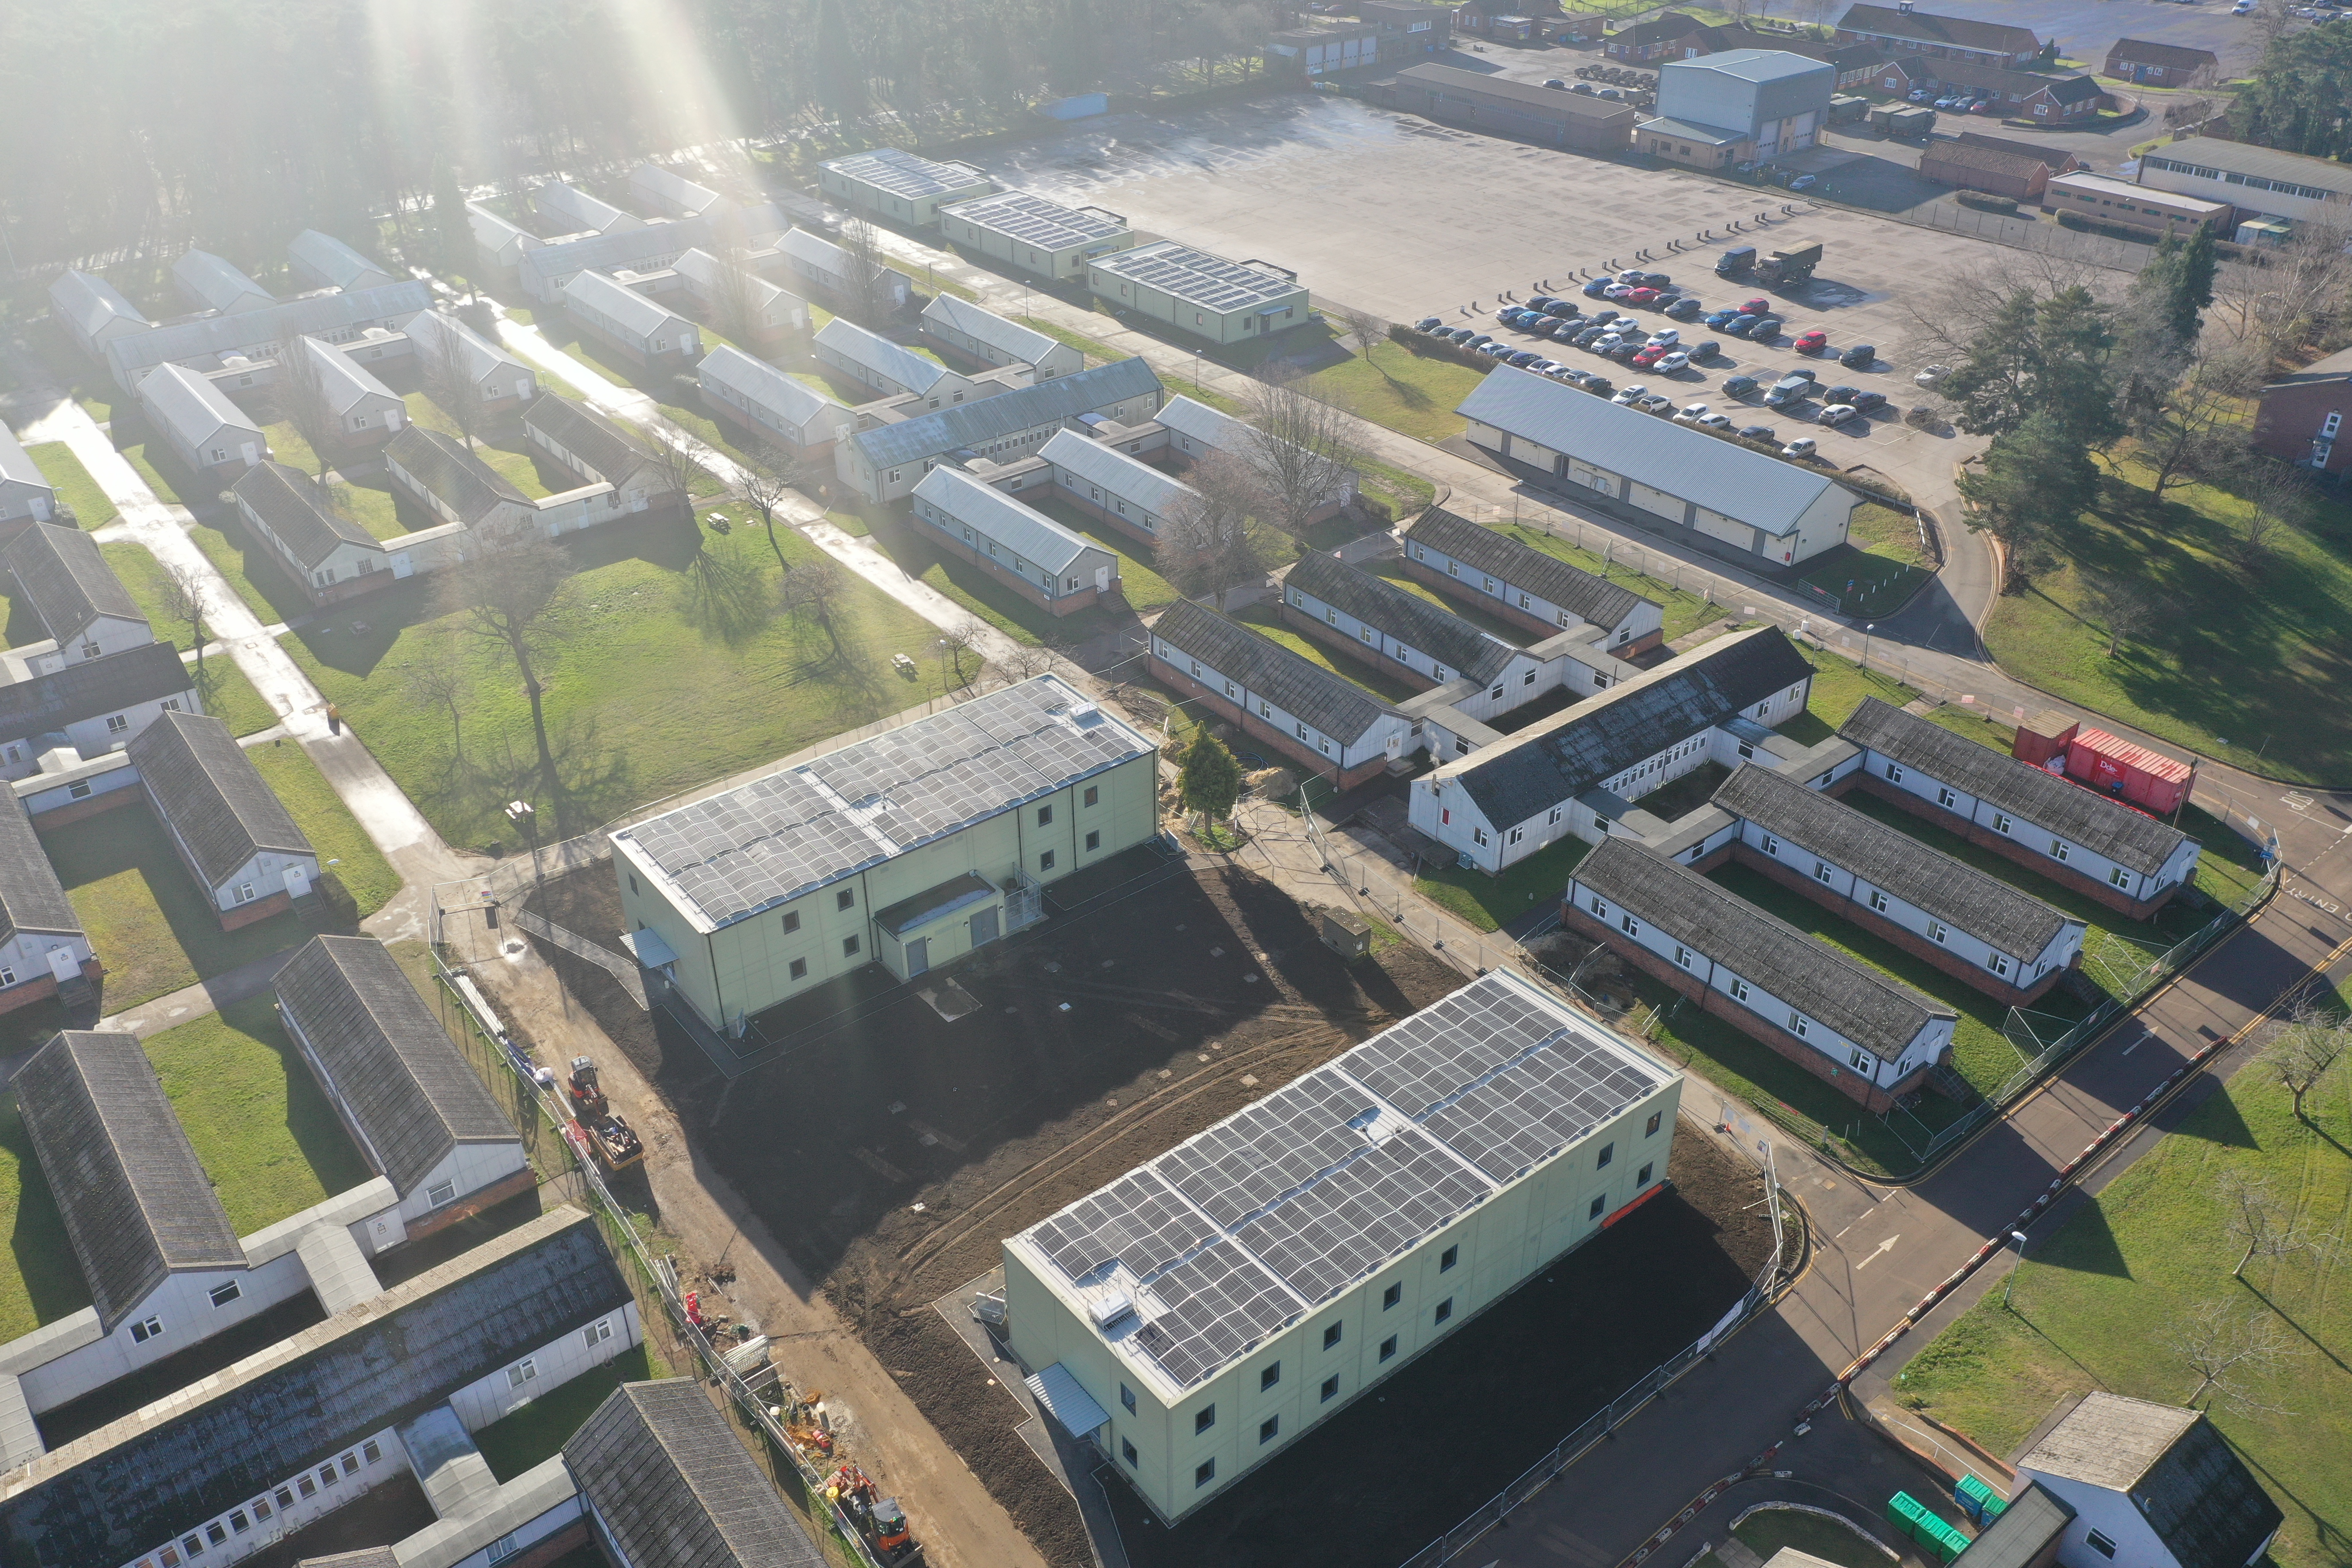 An aerial view of the two new double storey, carbon neutral accommodation buildings at Brunswick Camp. The buildings are a light green colour, with rows of solar panels along their roofs. Surrounding the two new buildings are a range of older barracks buildings and other facilities, with roads connecting the different areas of the camp.